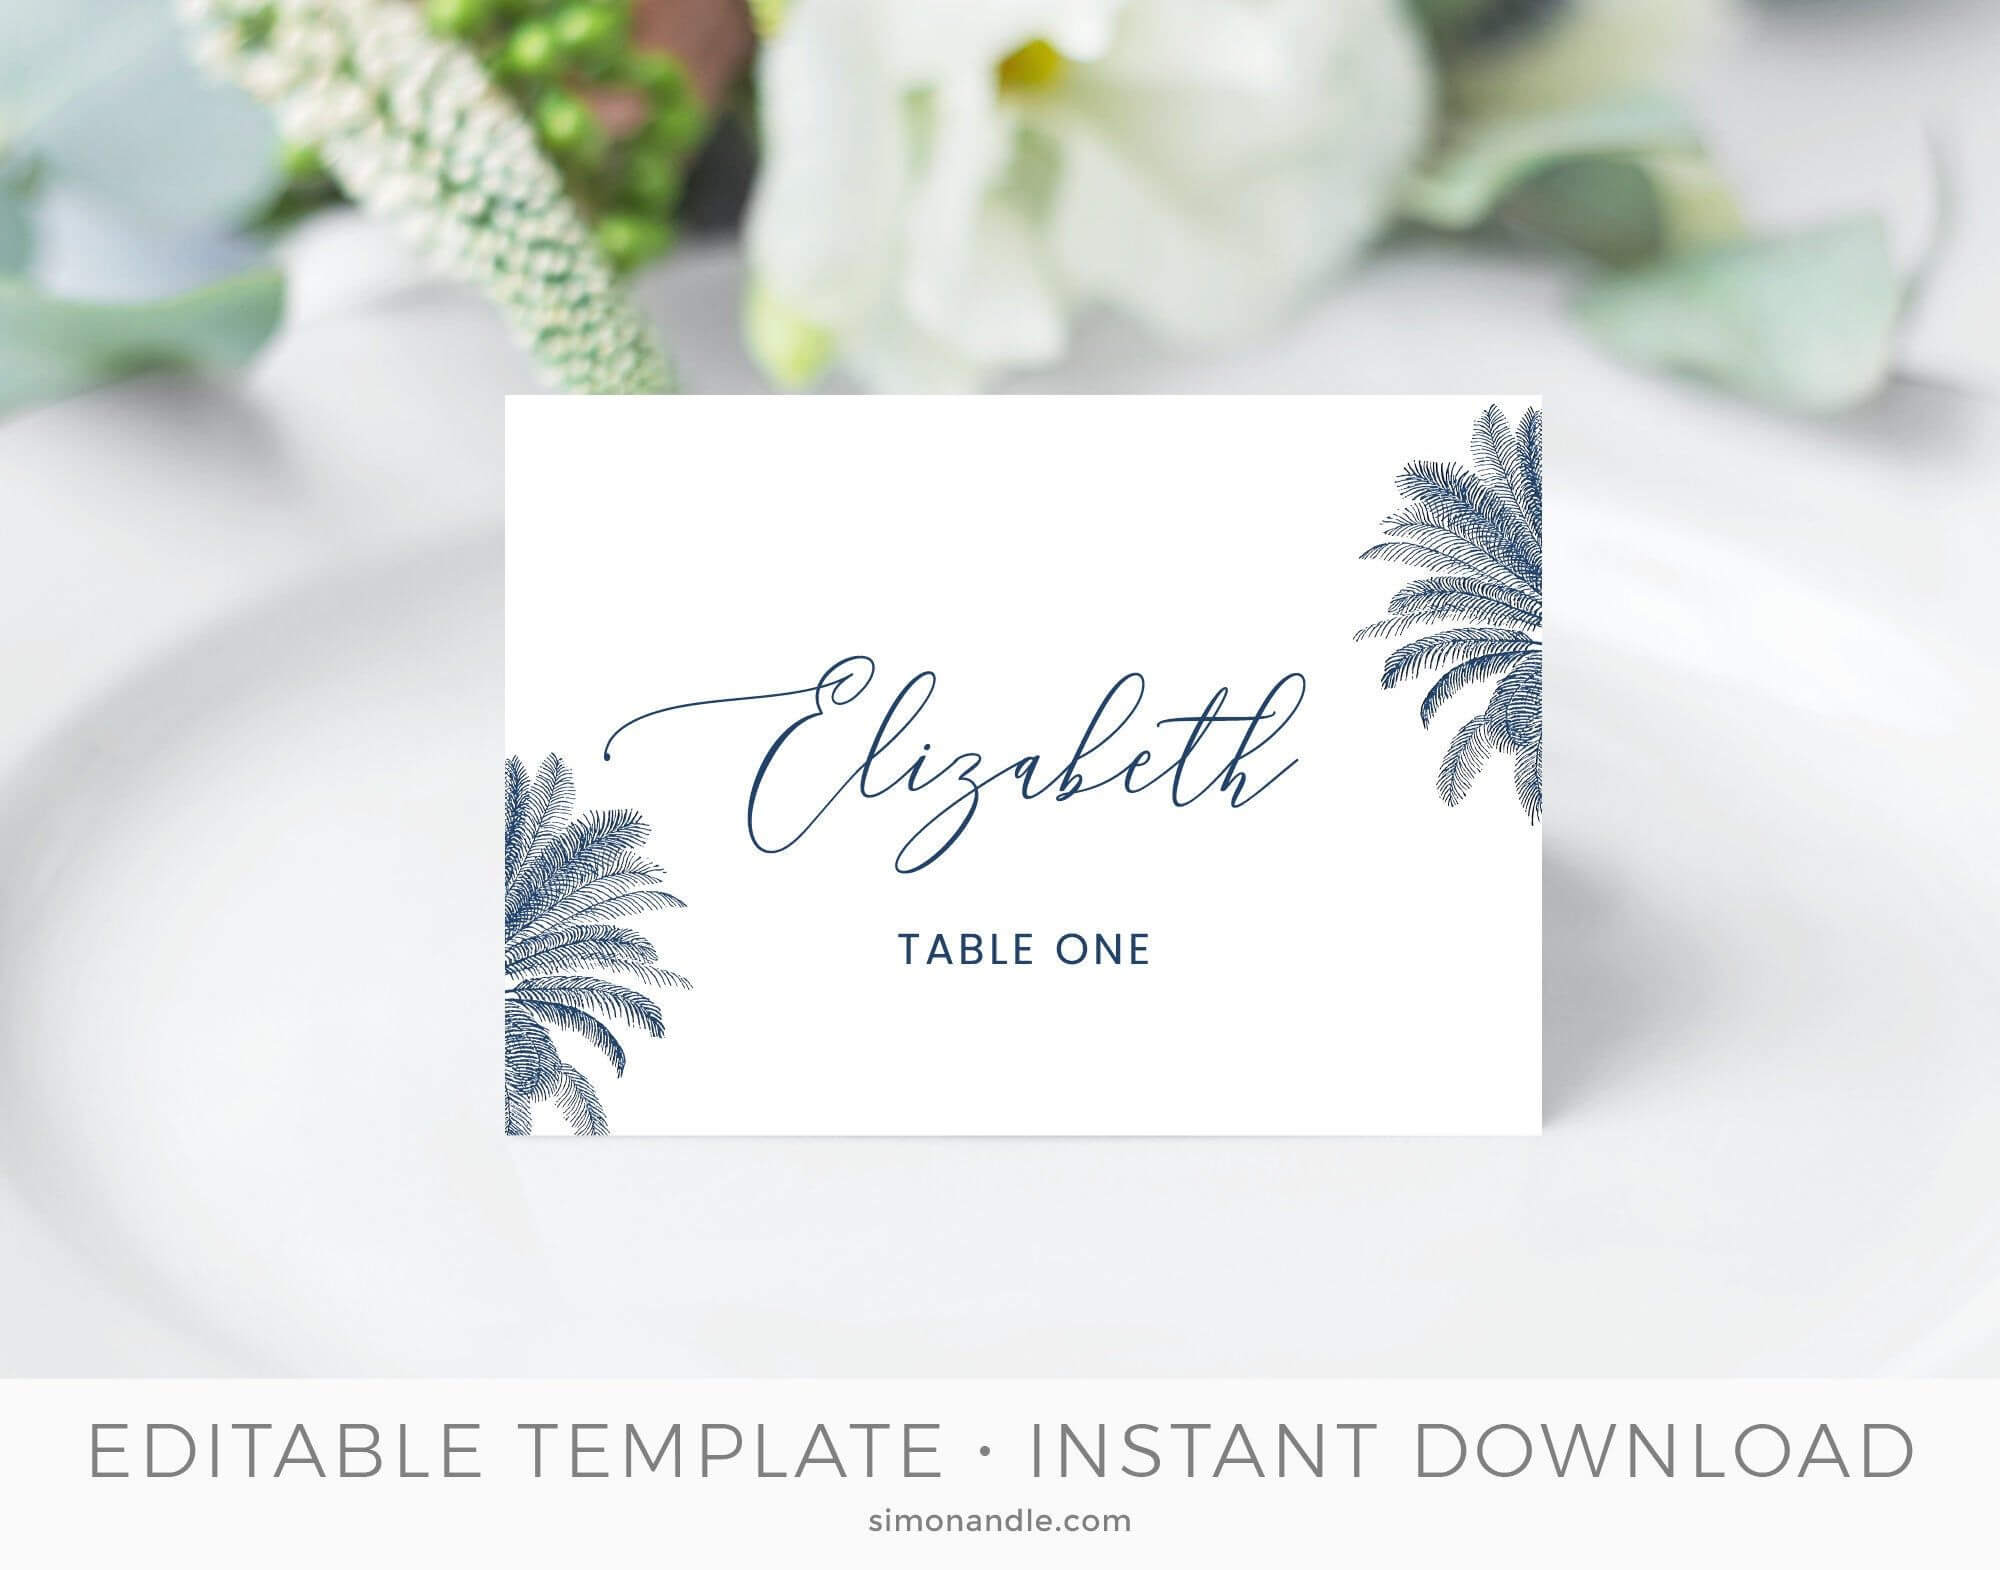 Hamptons Place Cards Template, Beach Tent Cards, Wedding Pertaining To Place Card Setting Template